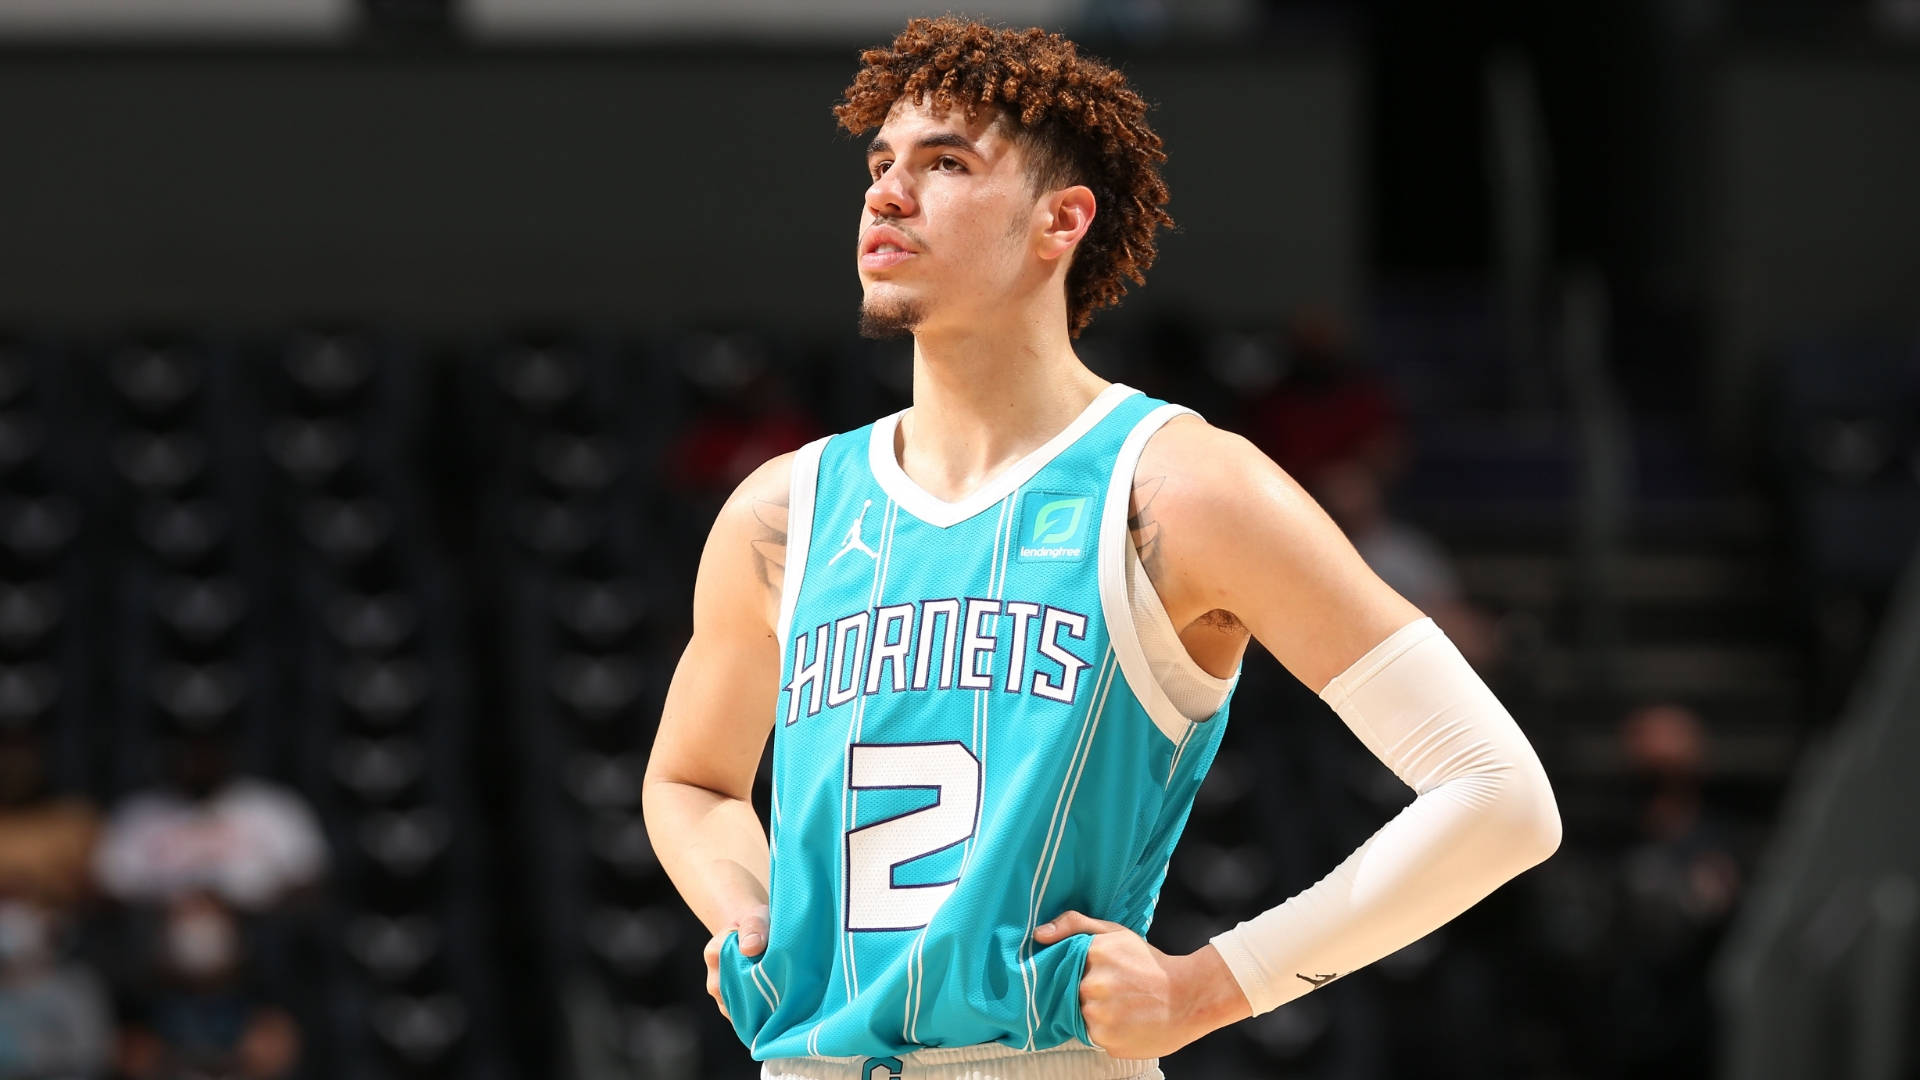 Hornets Lamelo Ball In Court Background